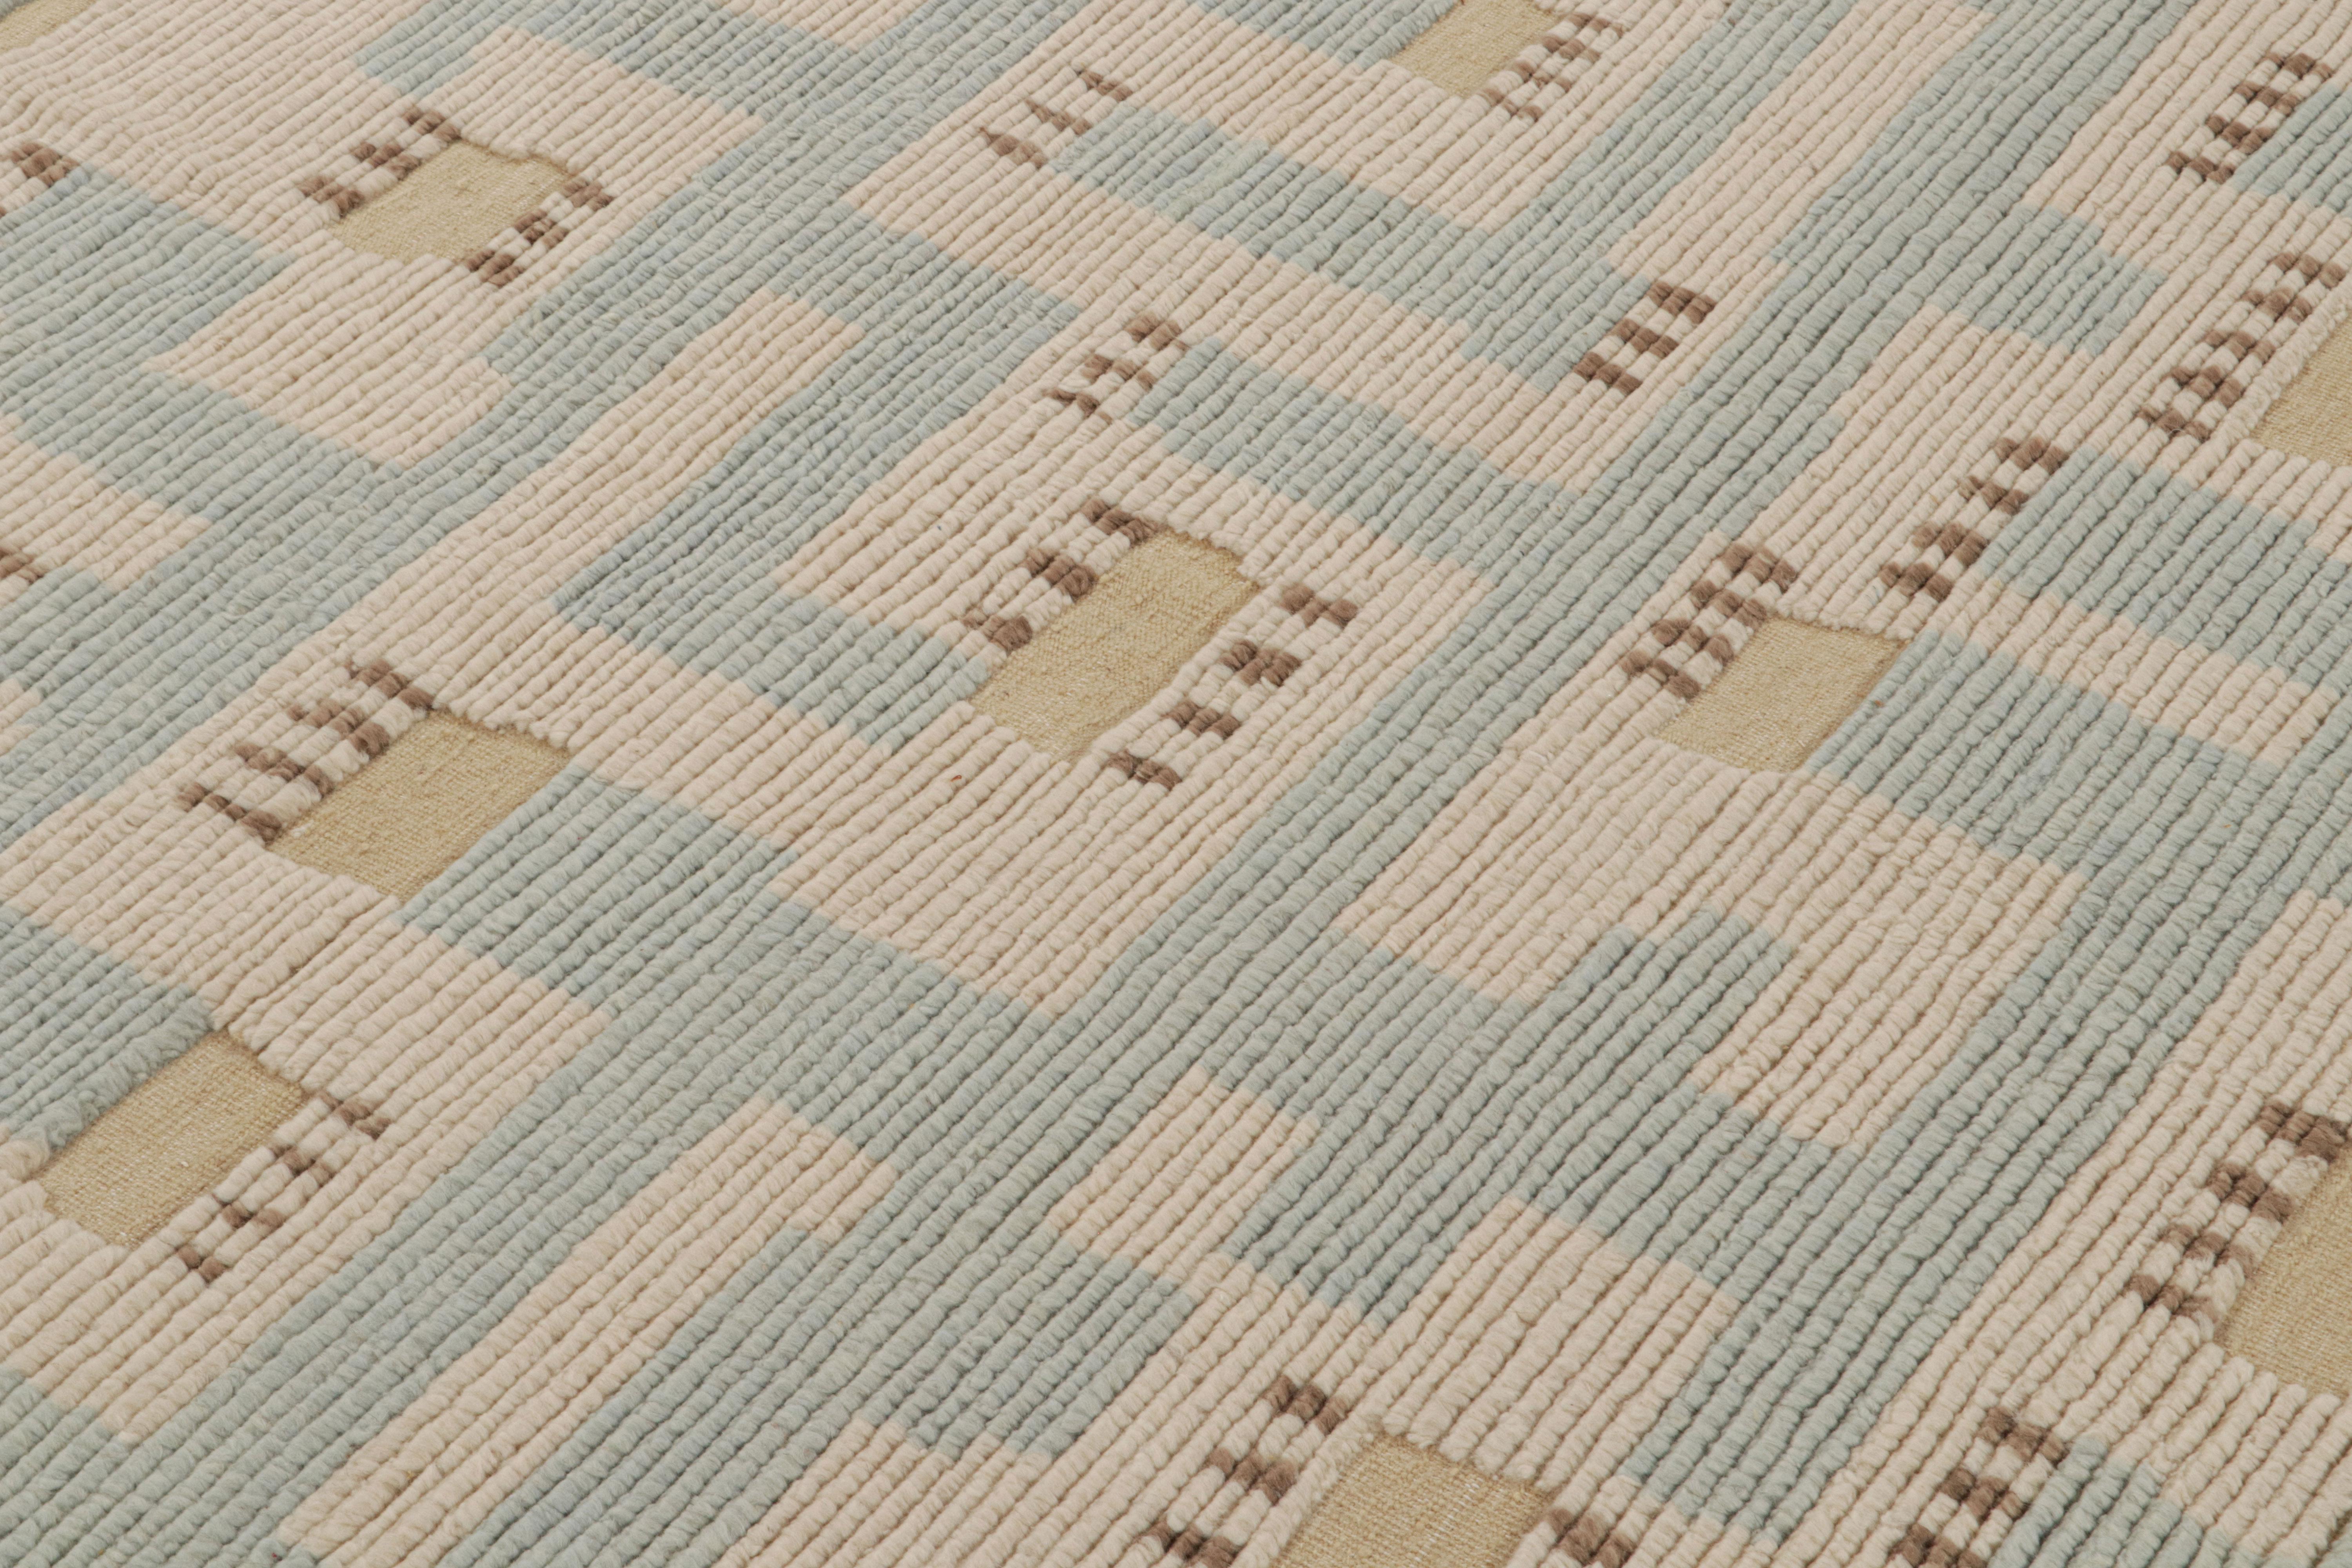 Contemporary Rug & Kilim’s “High” Scandinavian Style Rug with Blue and Beige Geometric For Sale